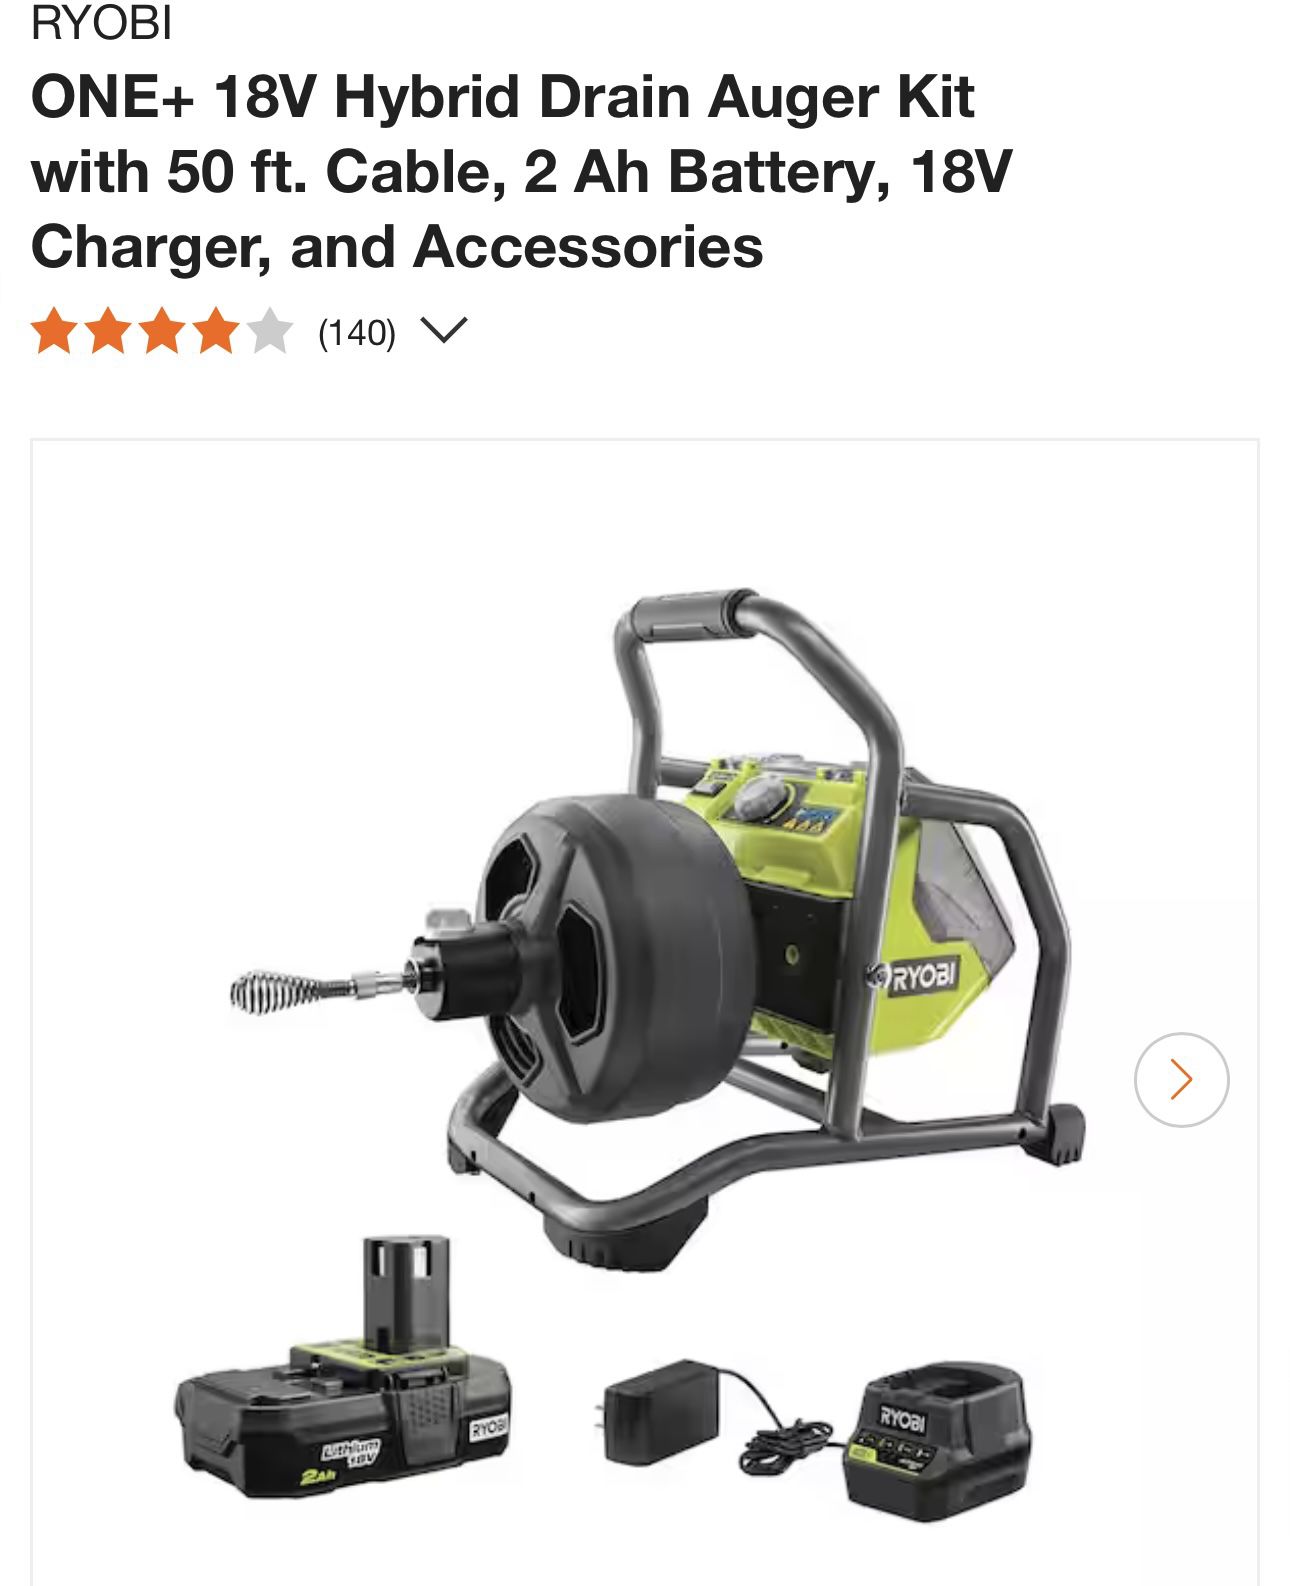 RYOBI ONE+ 18V Hybrid Drain Auger Kit with 50 ft. Cable, 2 Ah Battery, 18V Charger, and Accessories